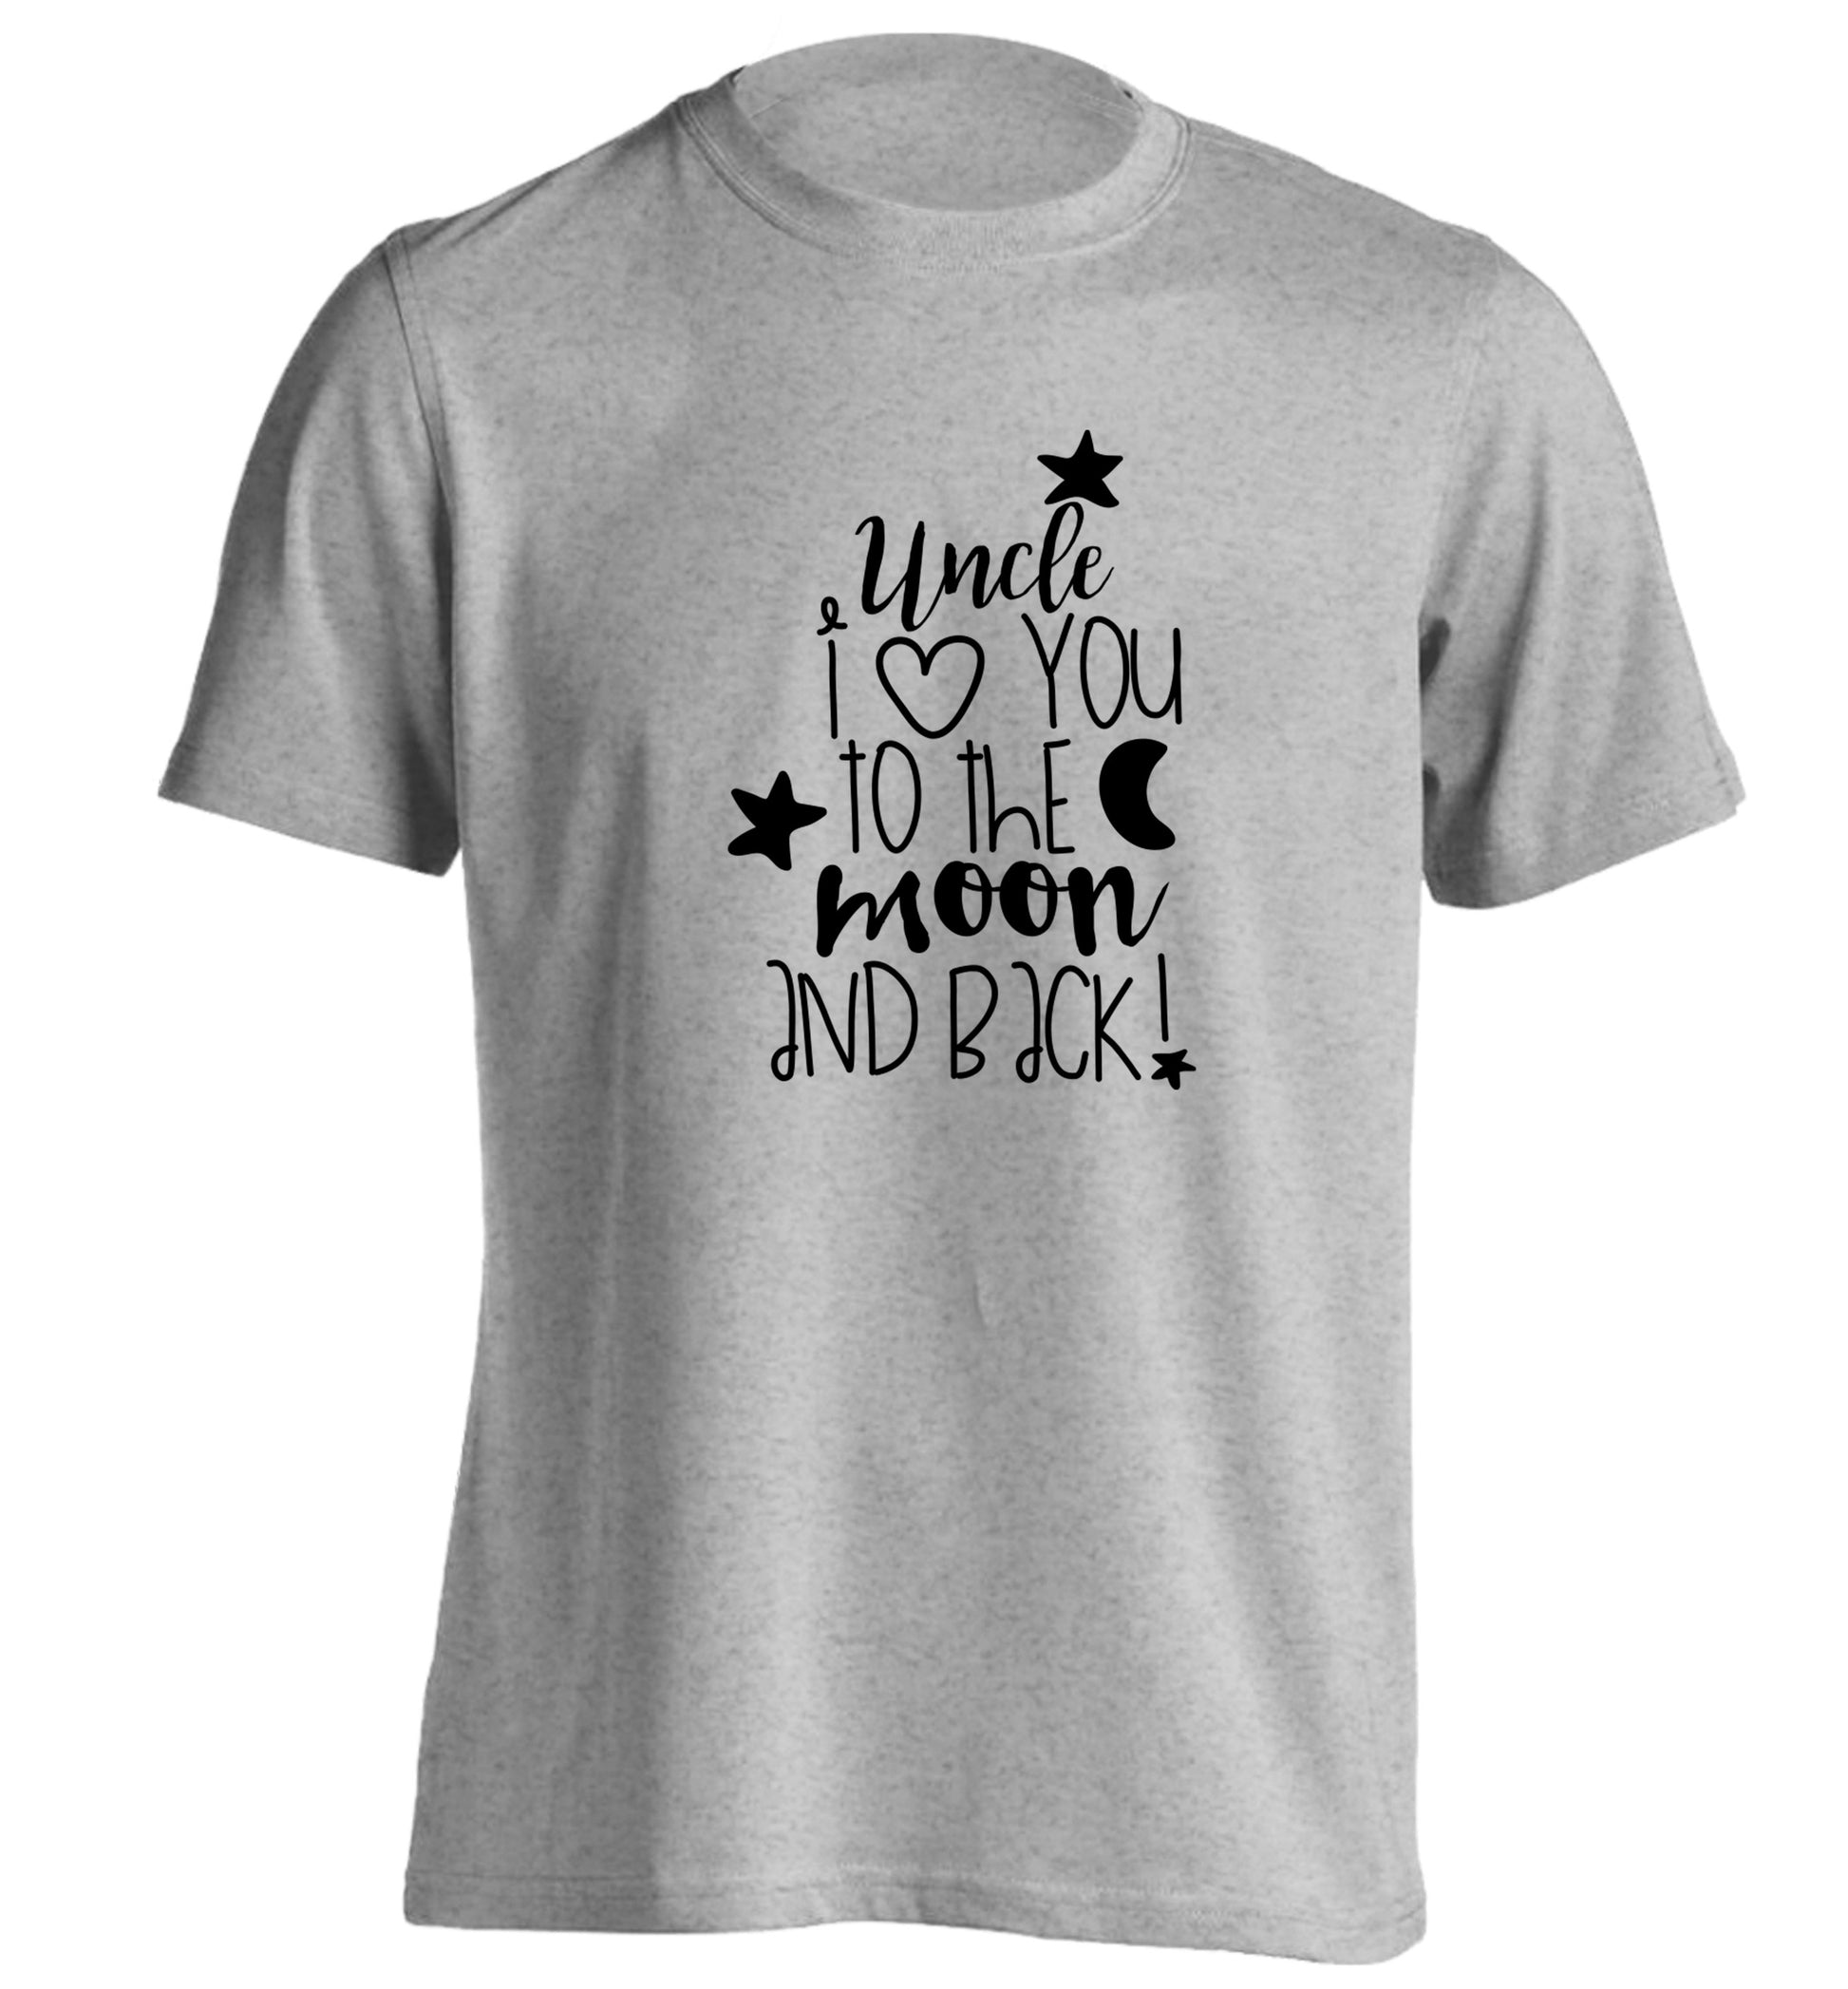 Uncle I love you to the moon and back adults unisex grey Tshirt 2XL